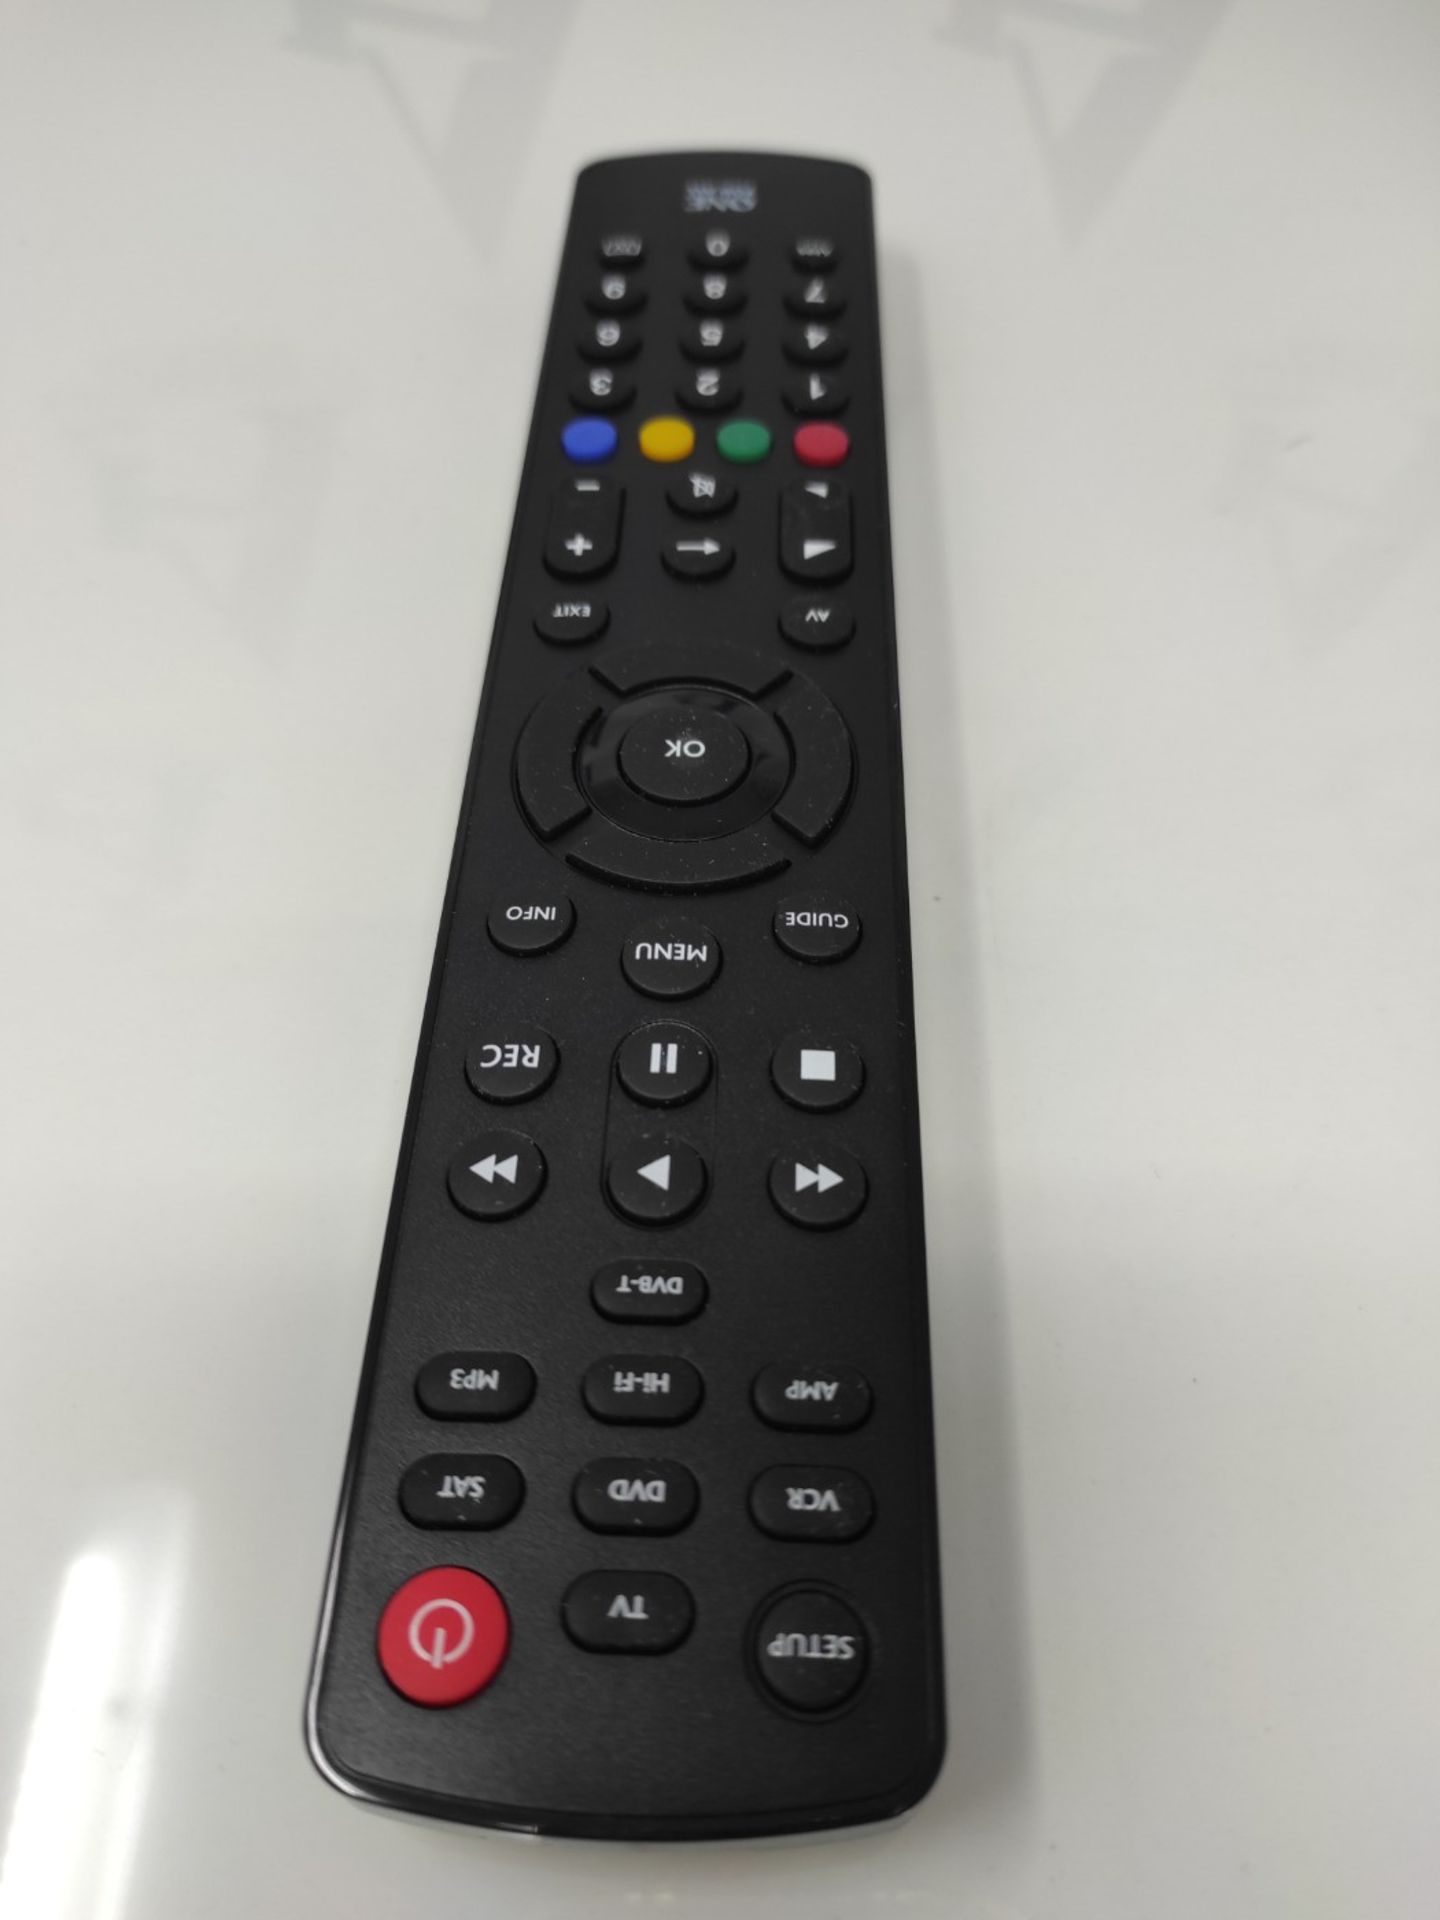 One For All URC1280 - Contour 8 - Universal remote control to control 8 devices - blac - Image 3 of 3